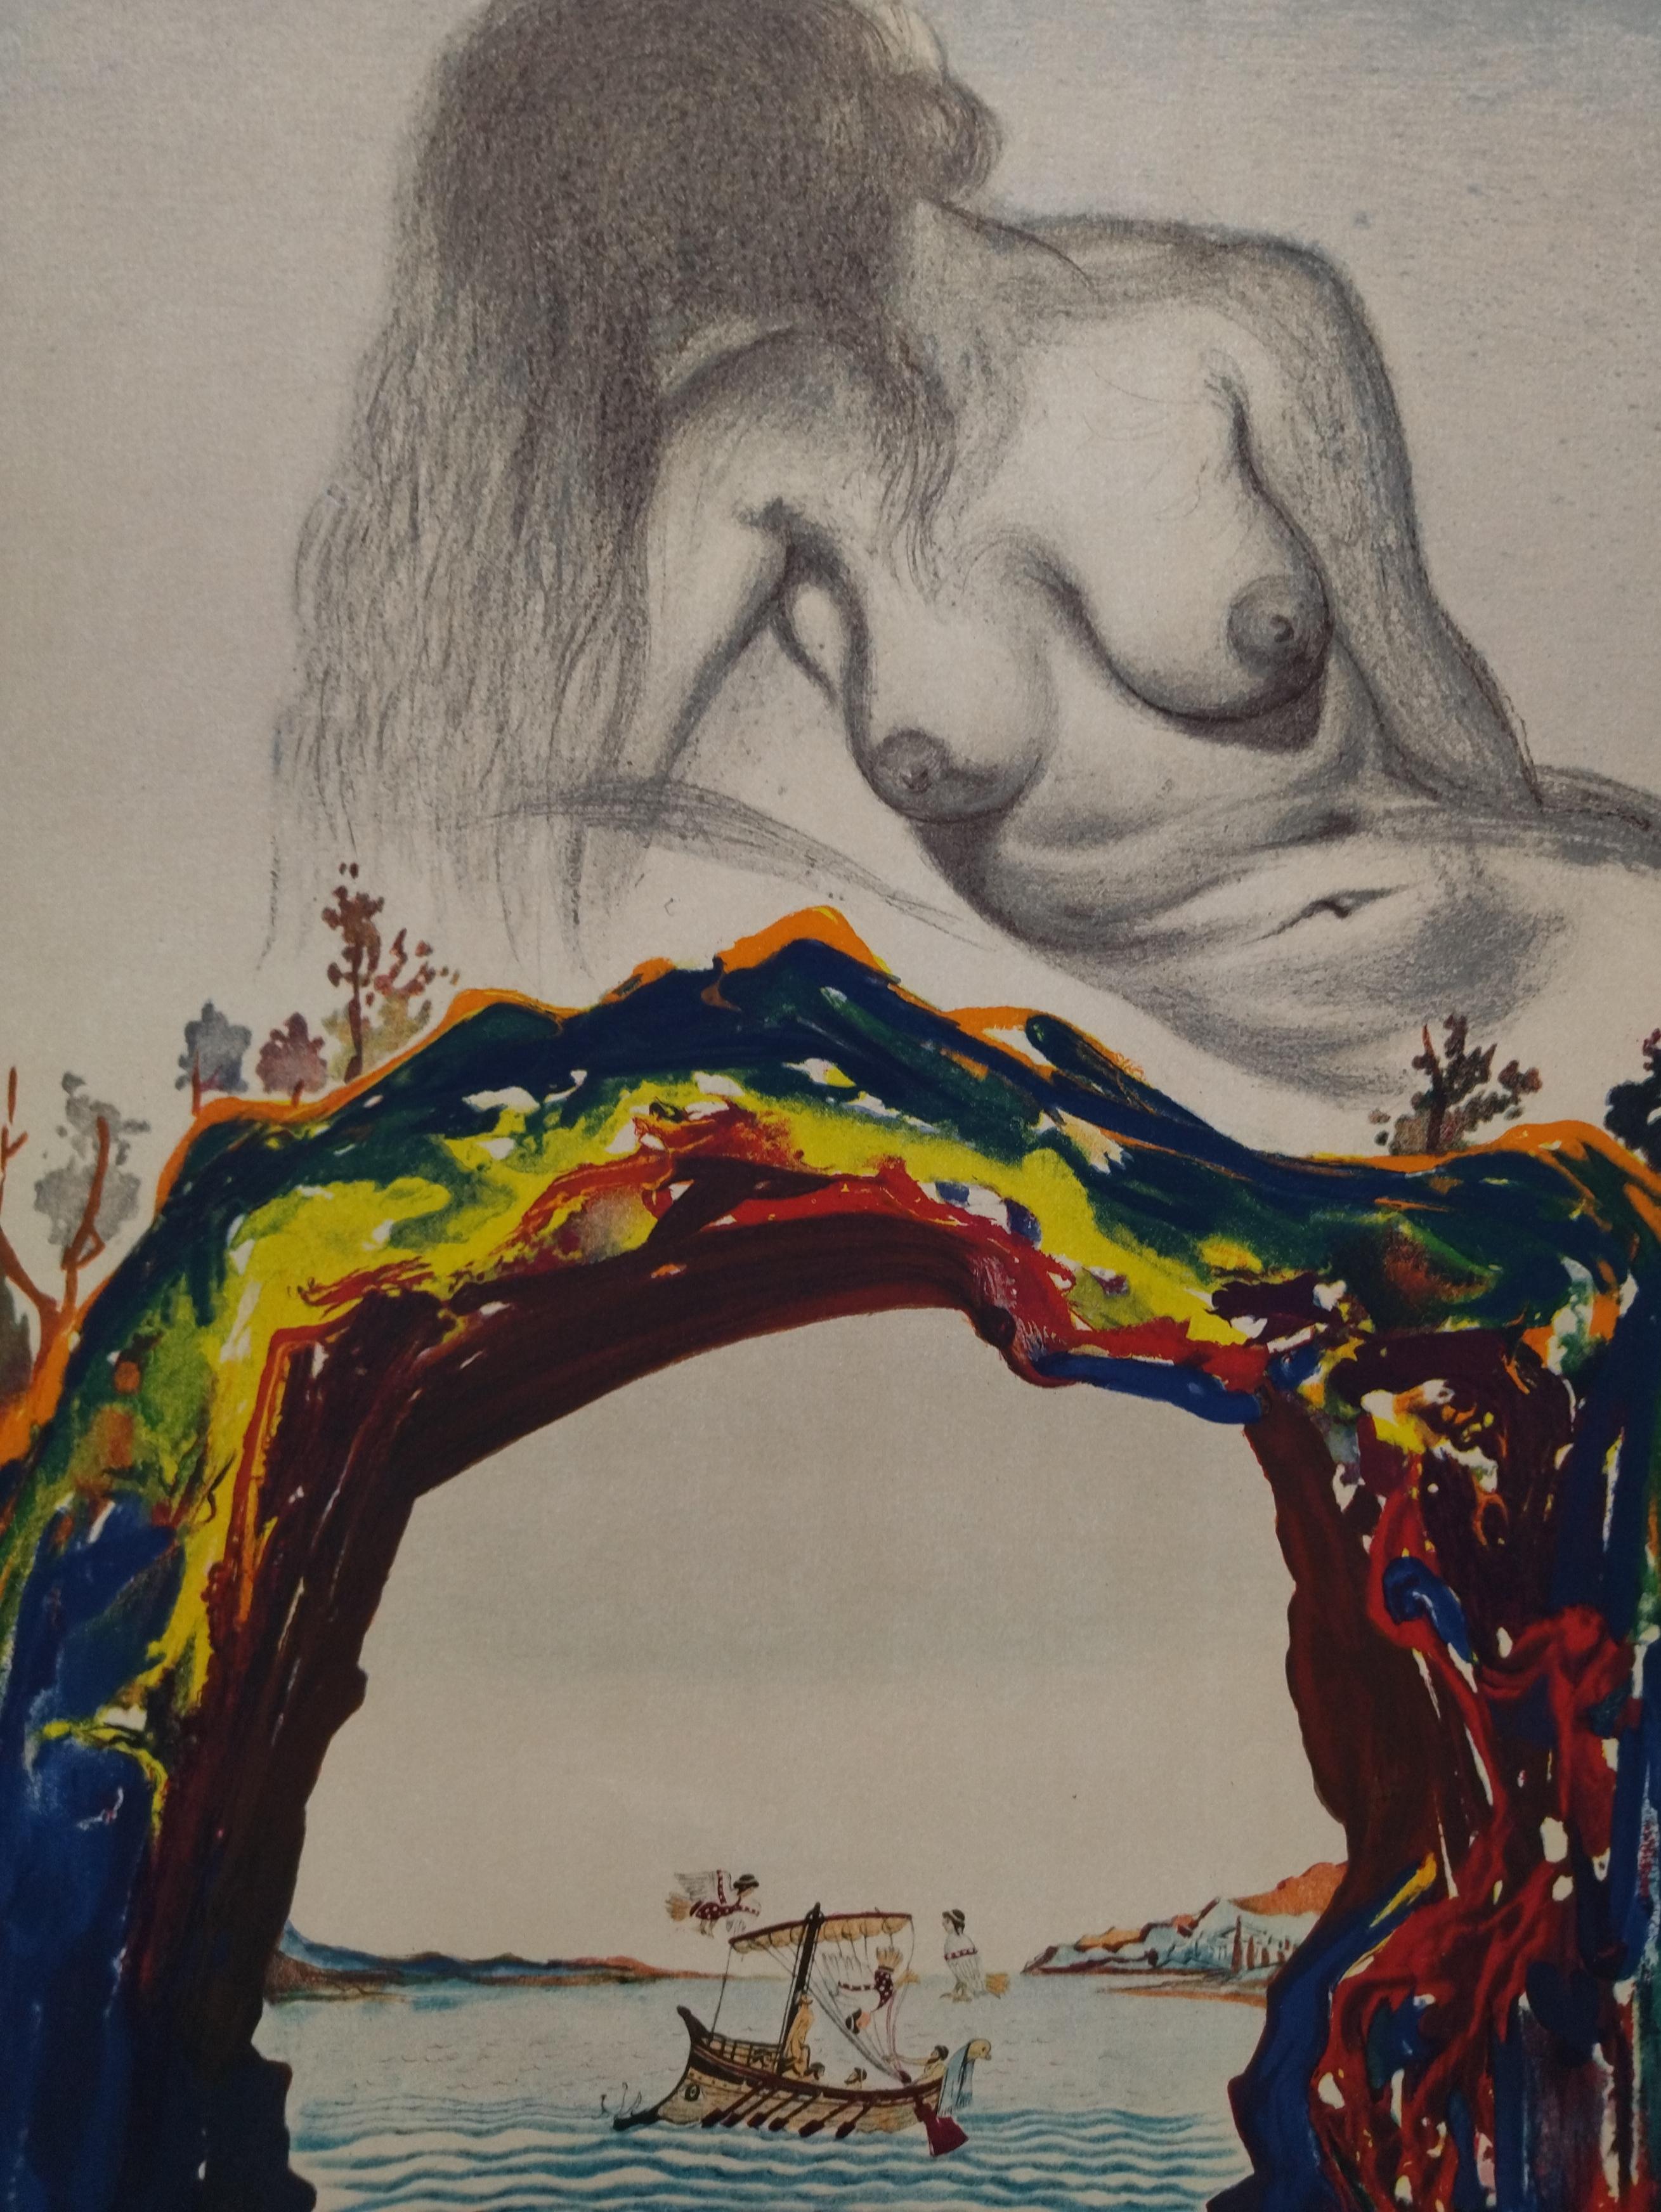 Work of the Spanish artist SALVADOR DALI.
edition of 195 copies + several E.A.
ej 149/195
certificate


 DALÍ, Salvador (Figueras, Gerona, 1904-1989). 
During its early years, Dalí discovers contemporary painting during a family visit to Cadaqués,